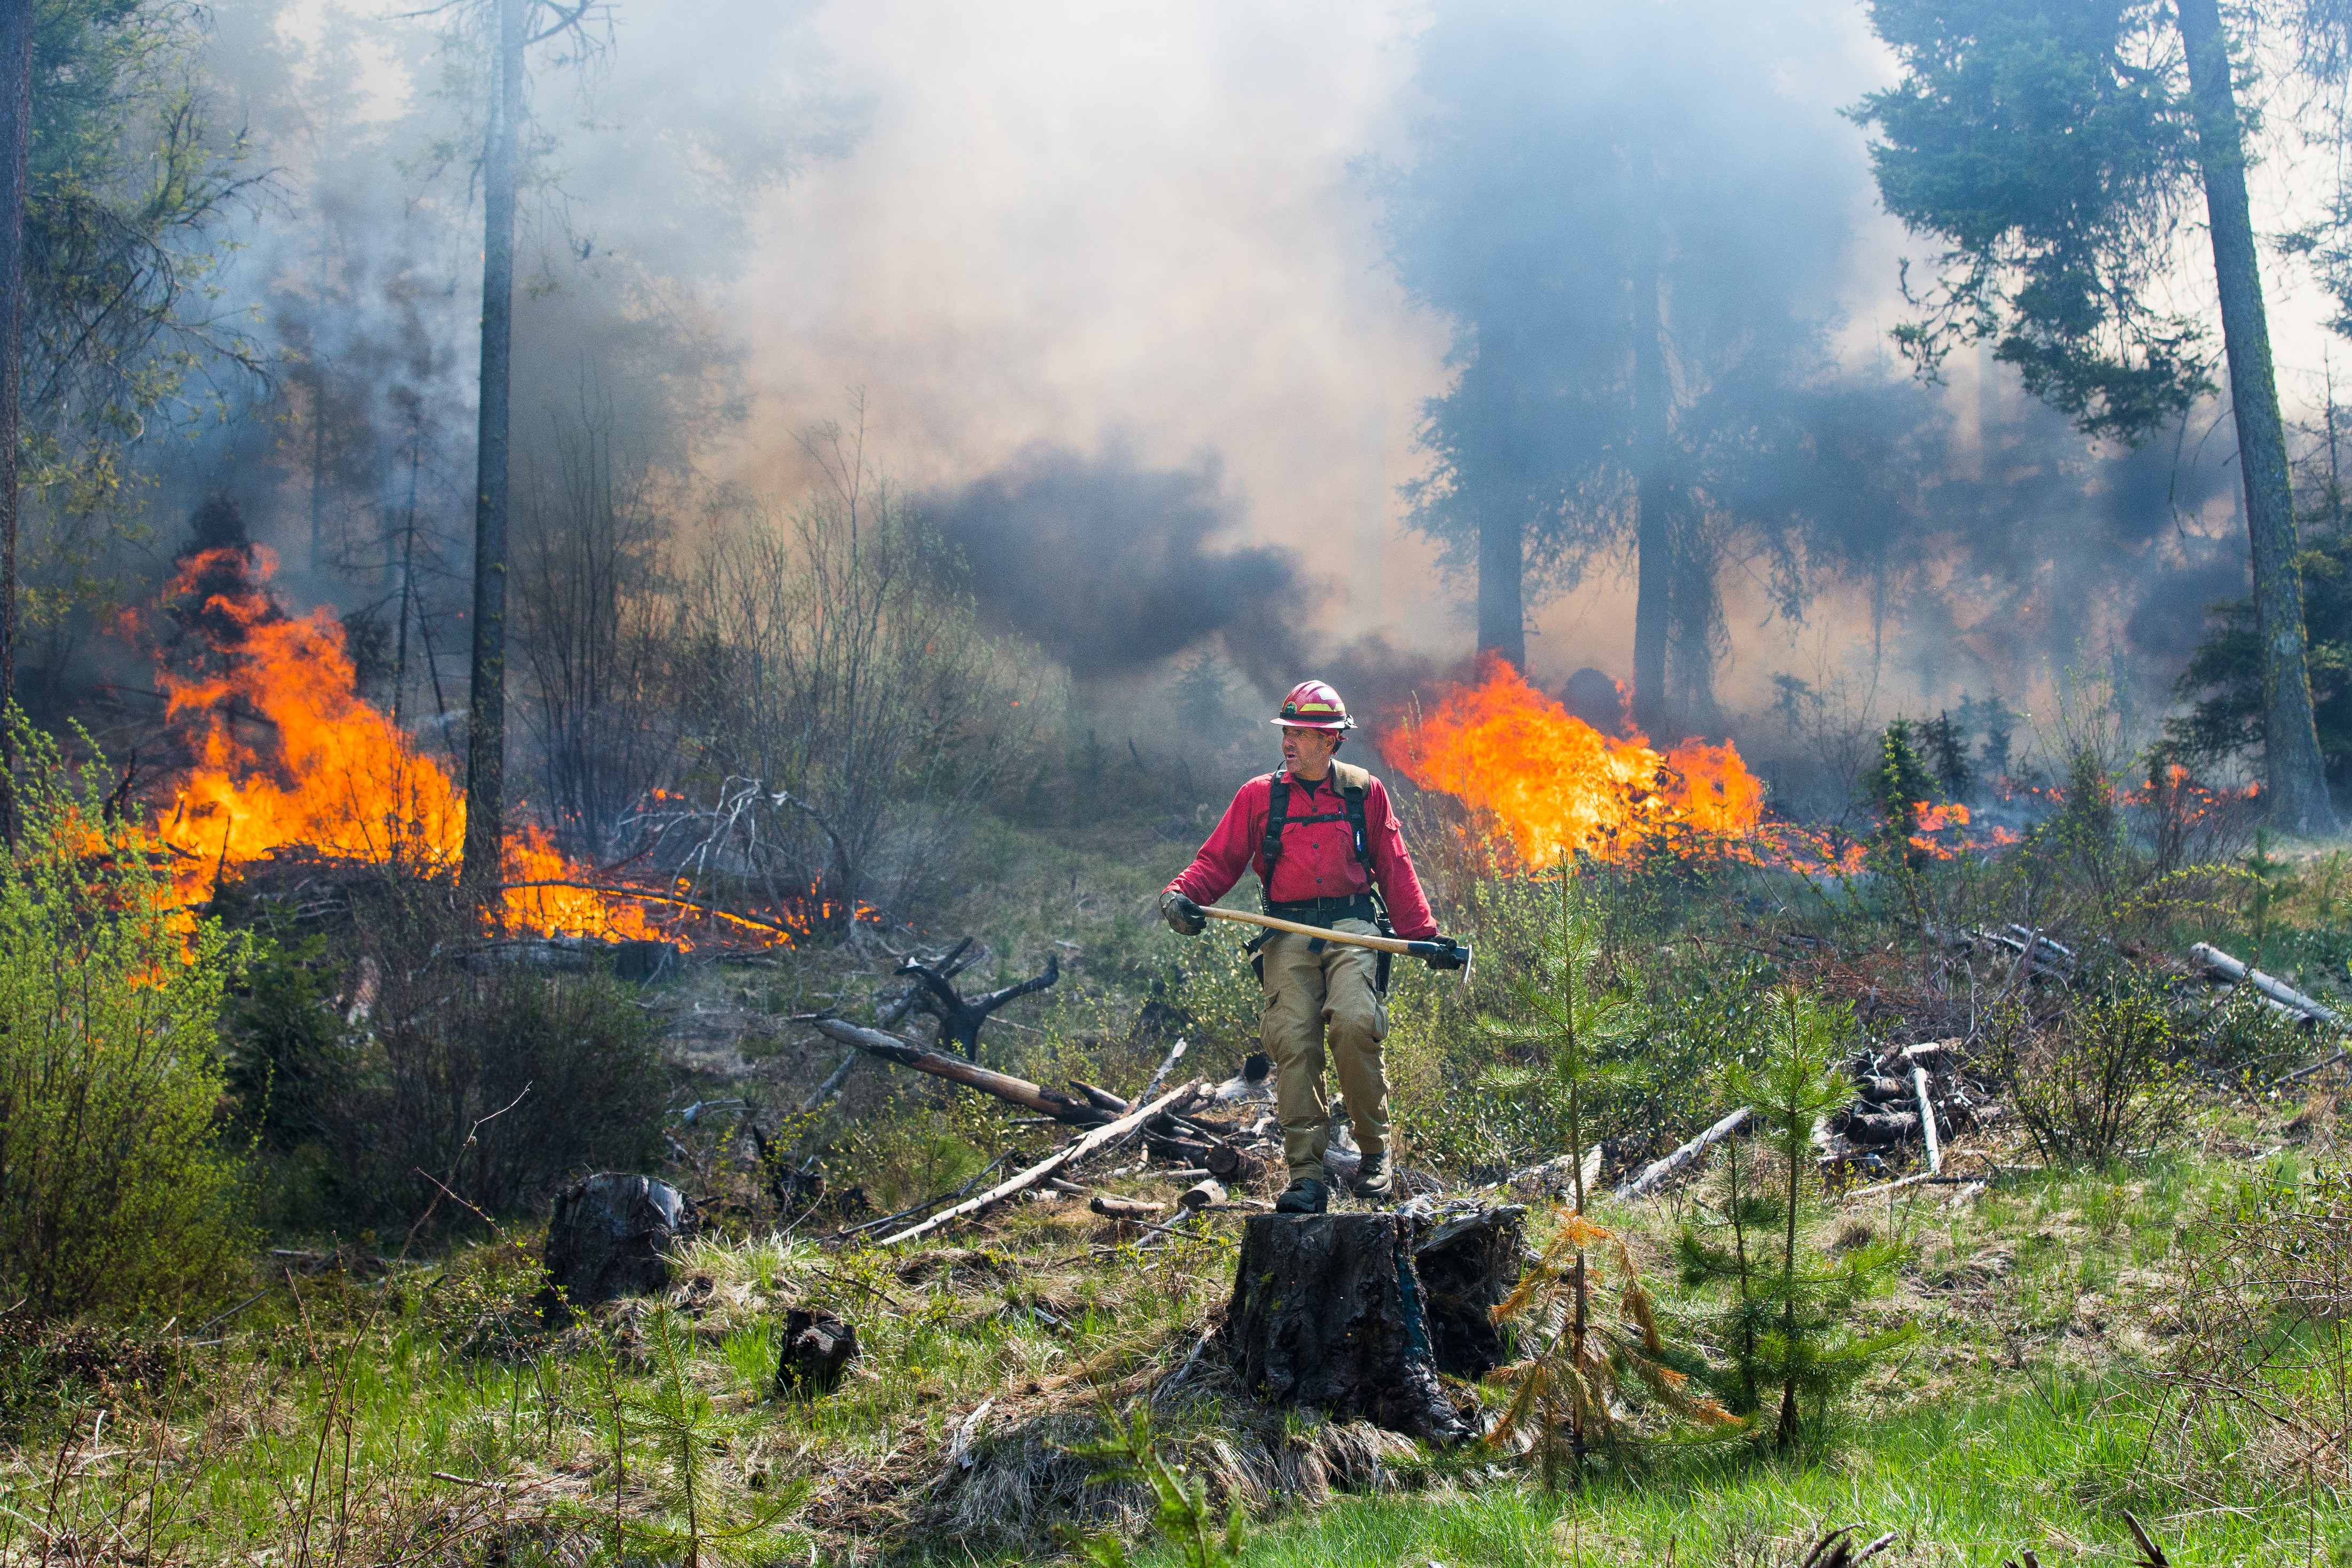 Coronavirus threatens response to wildfires; firefighter camps ‘ideal’ to spread disease